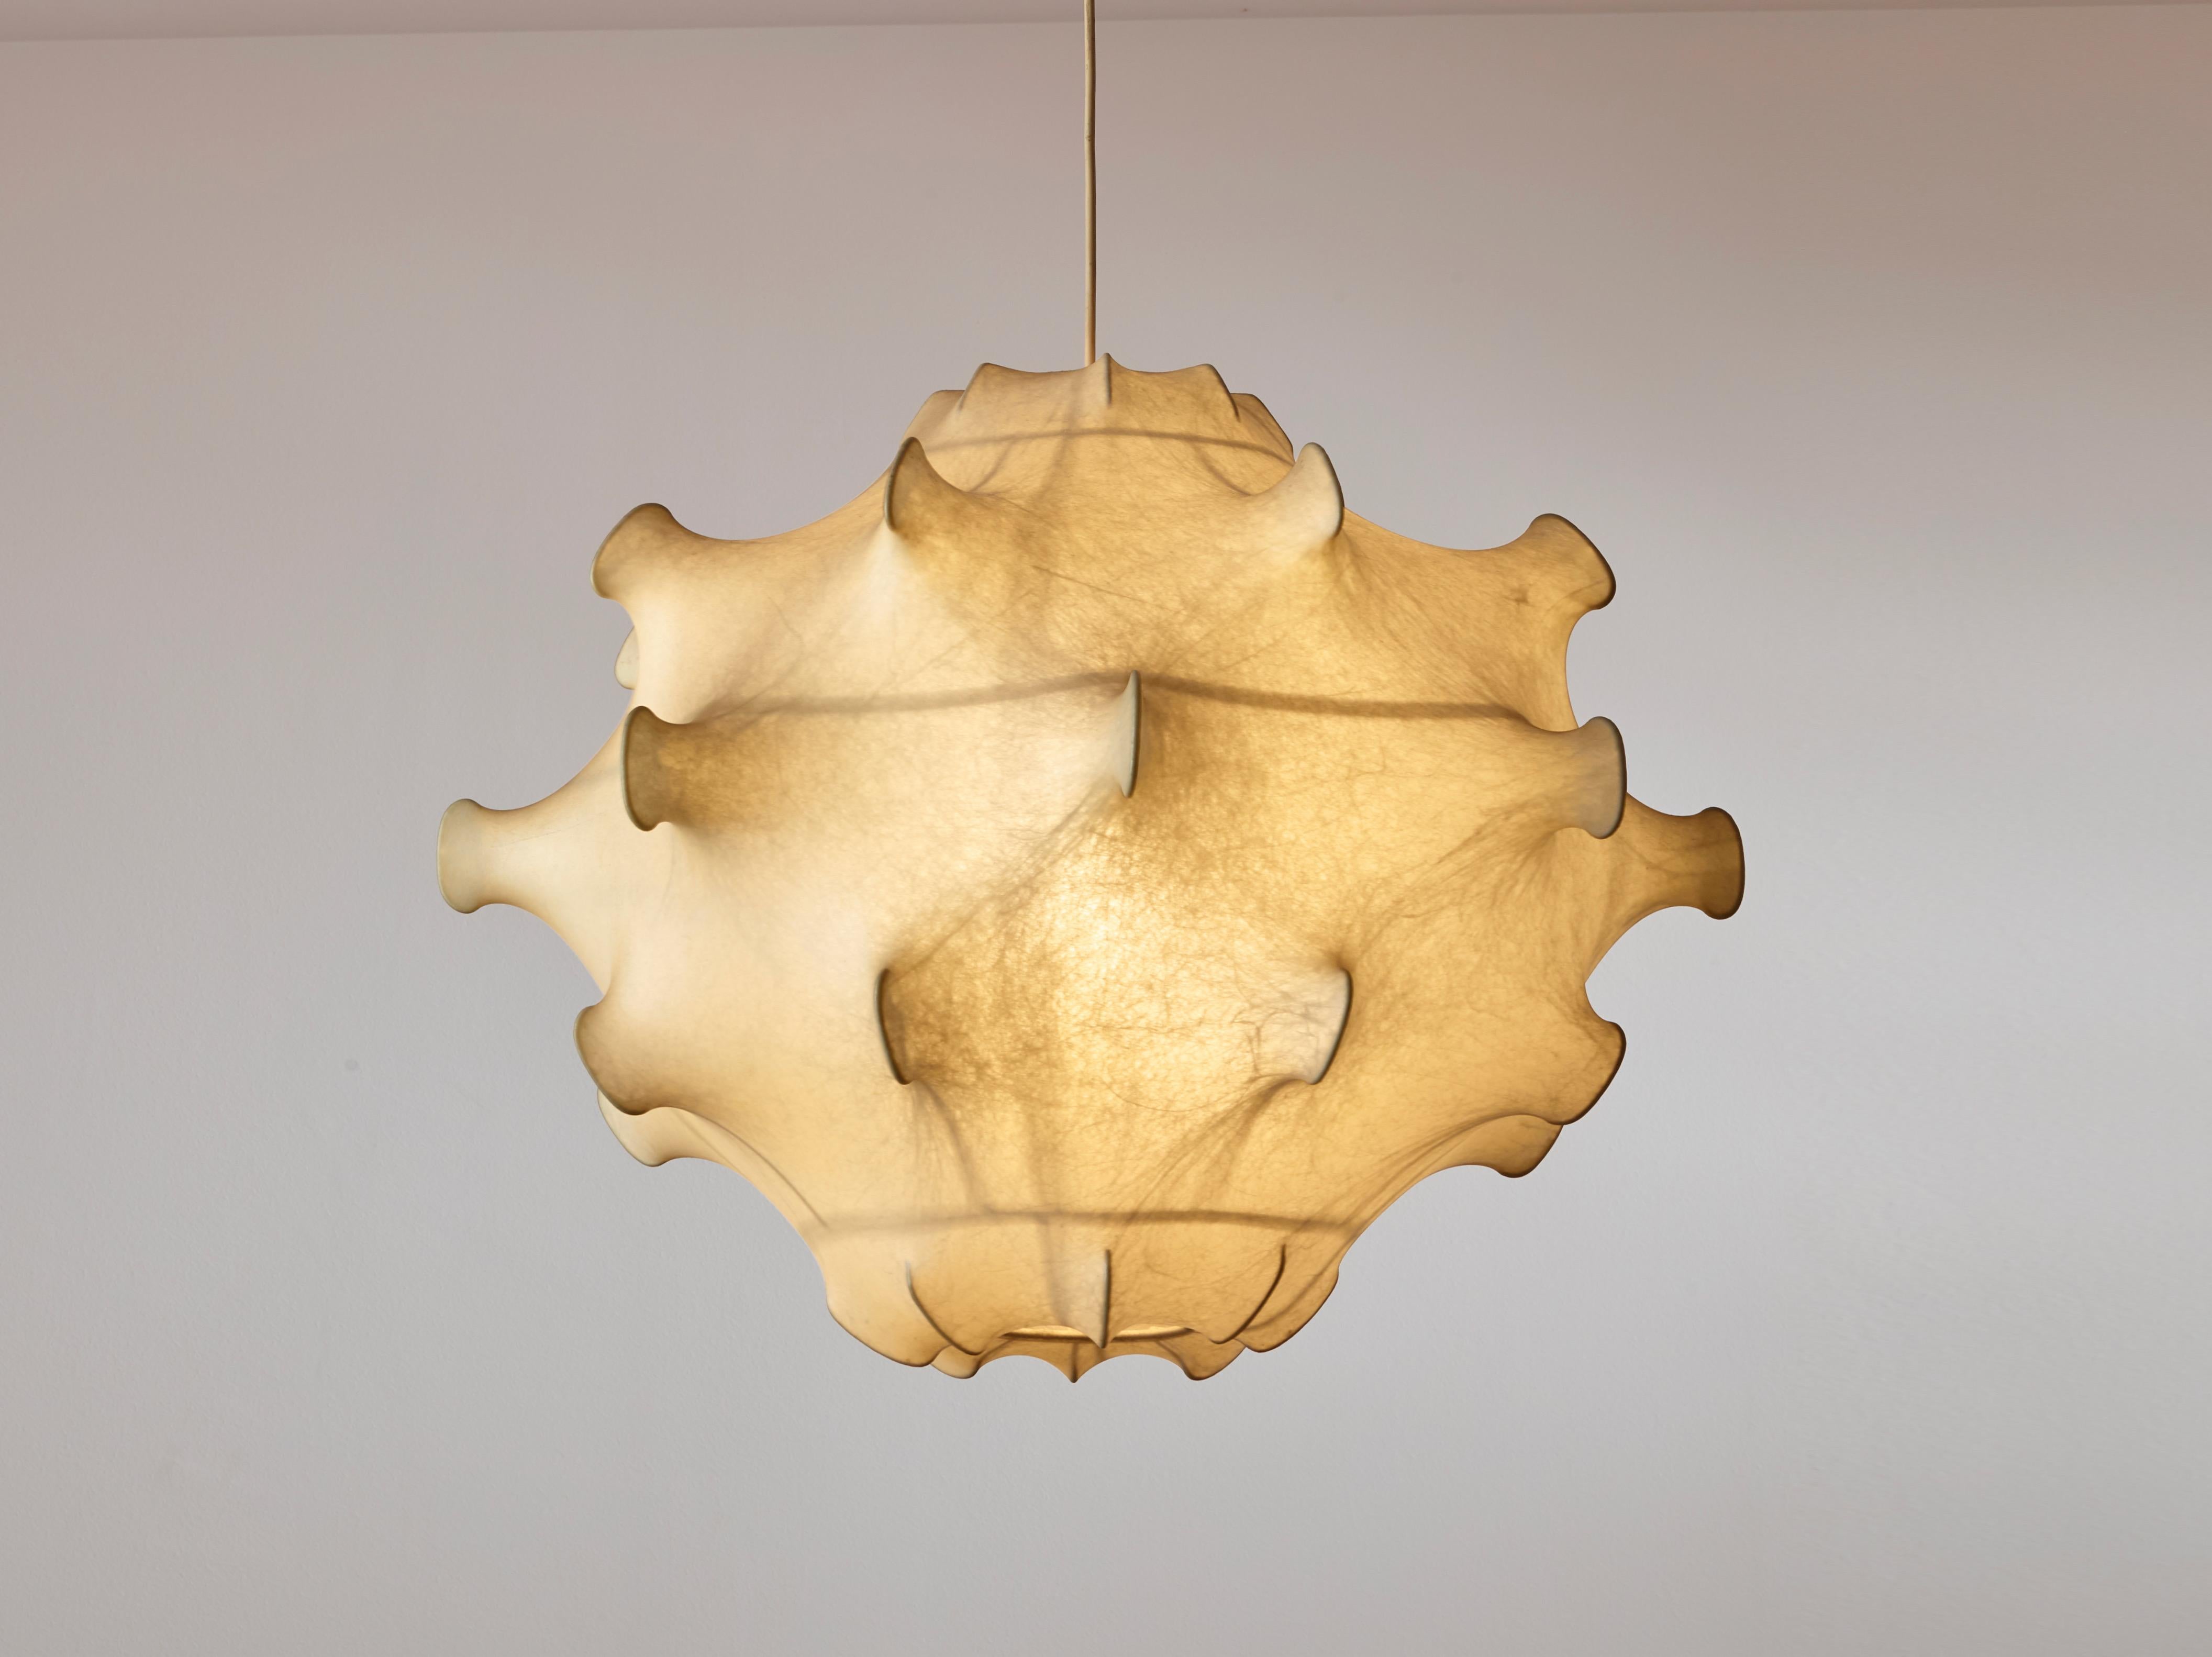 An original, vintage and in excellent condition ''Taraxacum'' cocoon suspension lamp designed in the 1960 by Achille and Pier Giacomo Castiglioni and manufactured by Flos in the same period.

With a diameter of 67cm, the lamp is designed using a